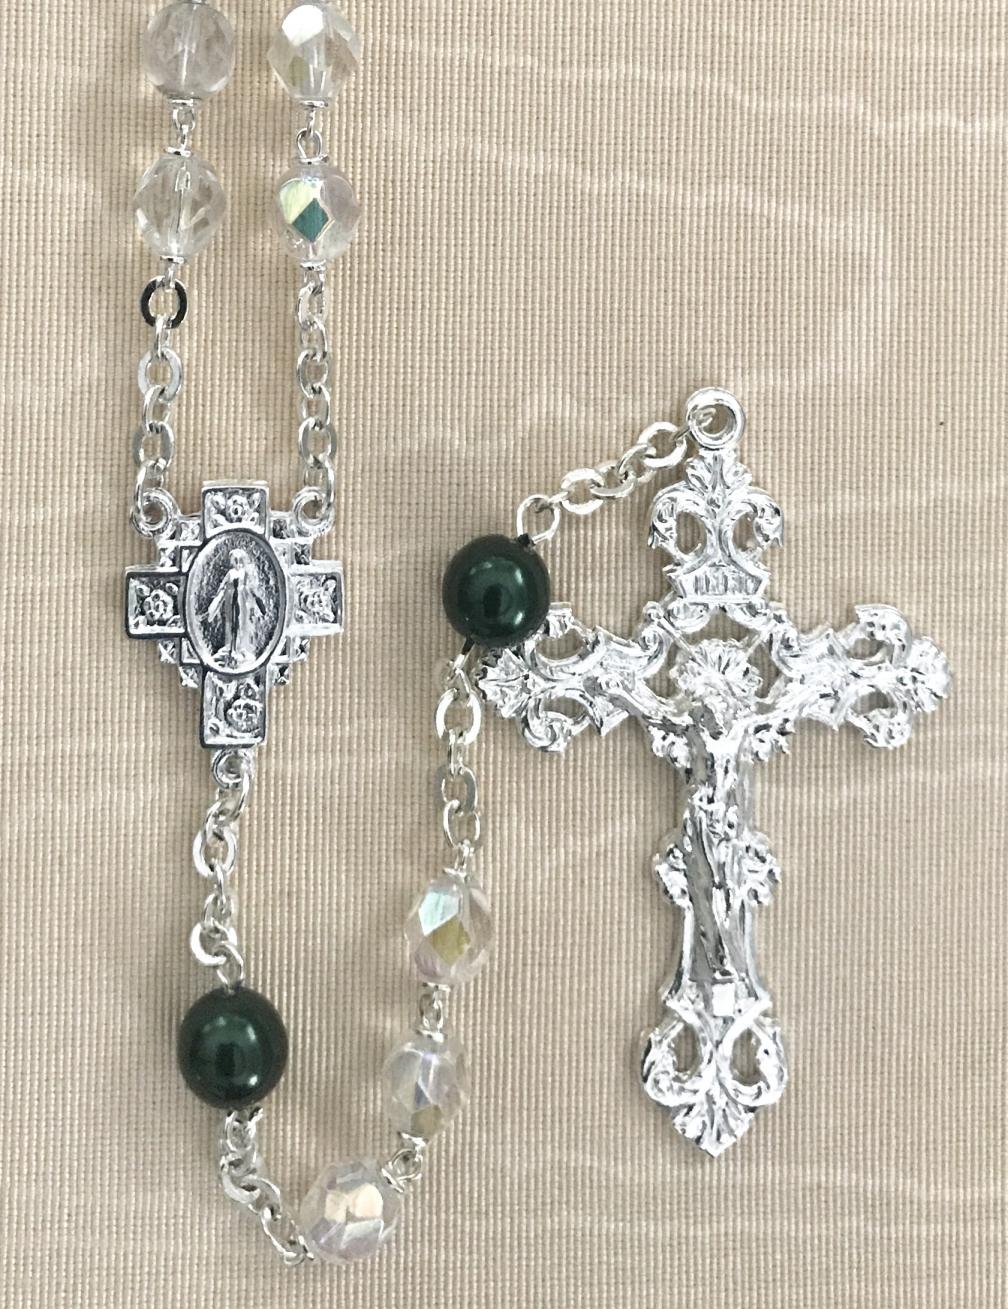 7mm CRYSTAL AB WITH EMERALD PEARL OUR FATHER BEADS STERLING SILVER PLATED ROSARY GIFT BOXED